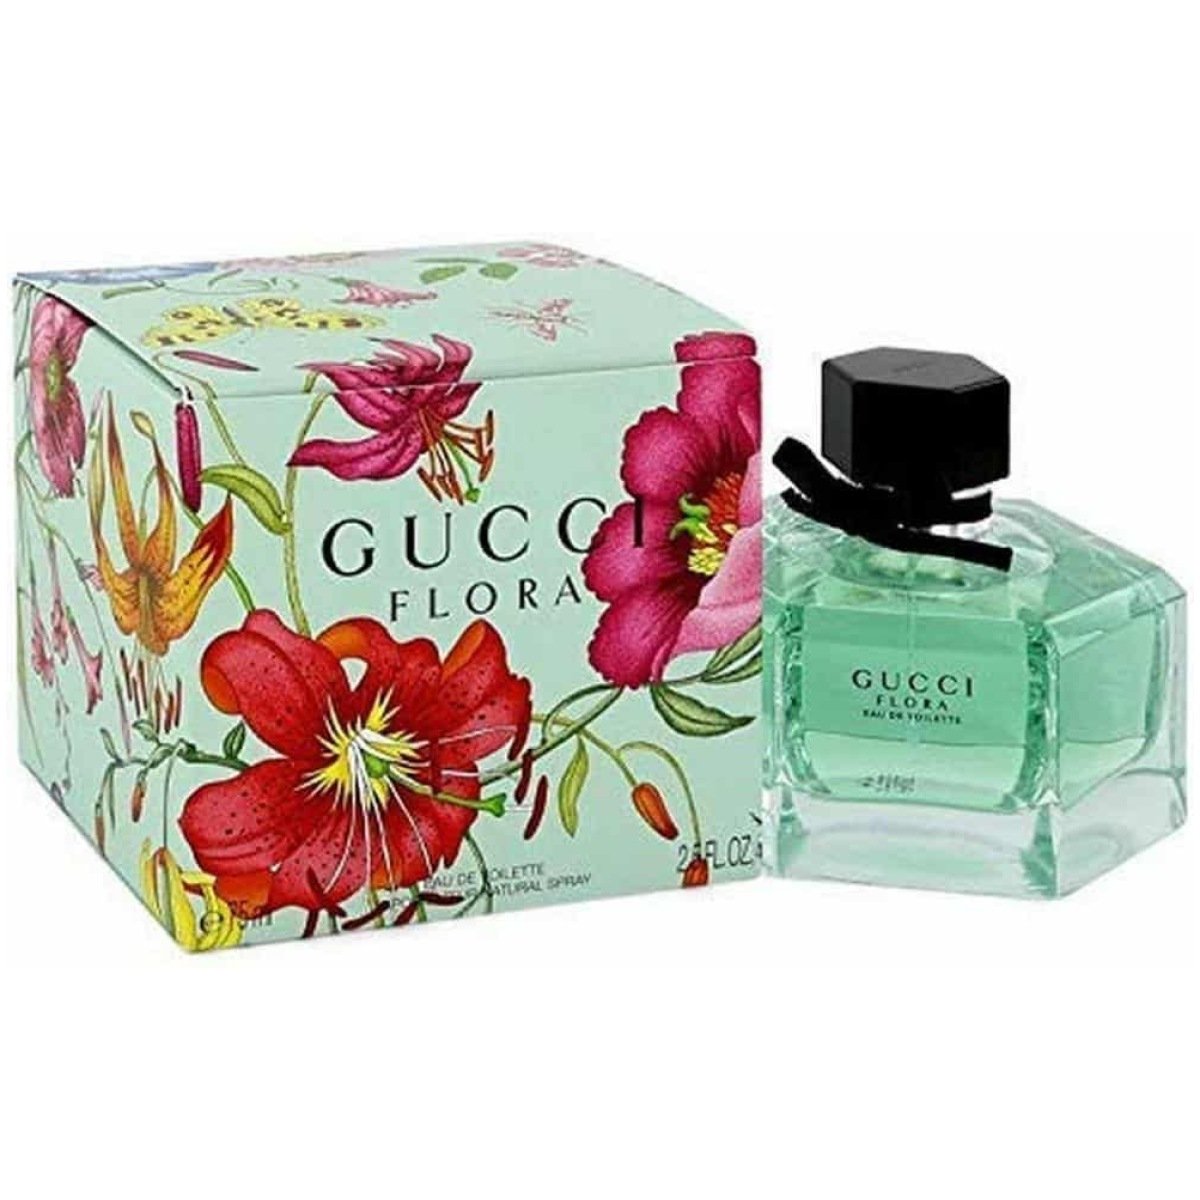 Gucci Flora EDT Perfume For Women 75 ml